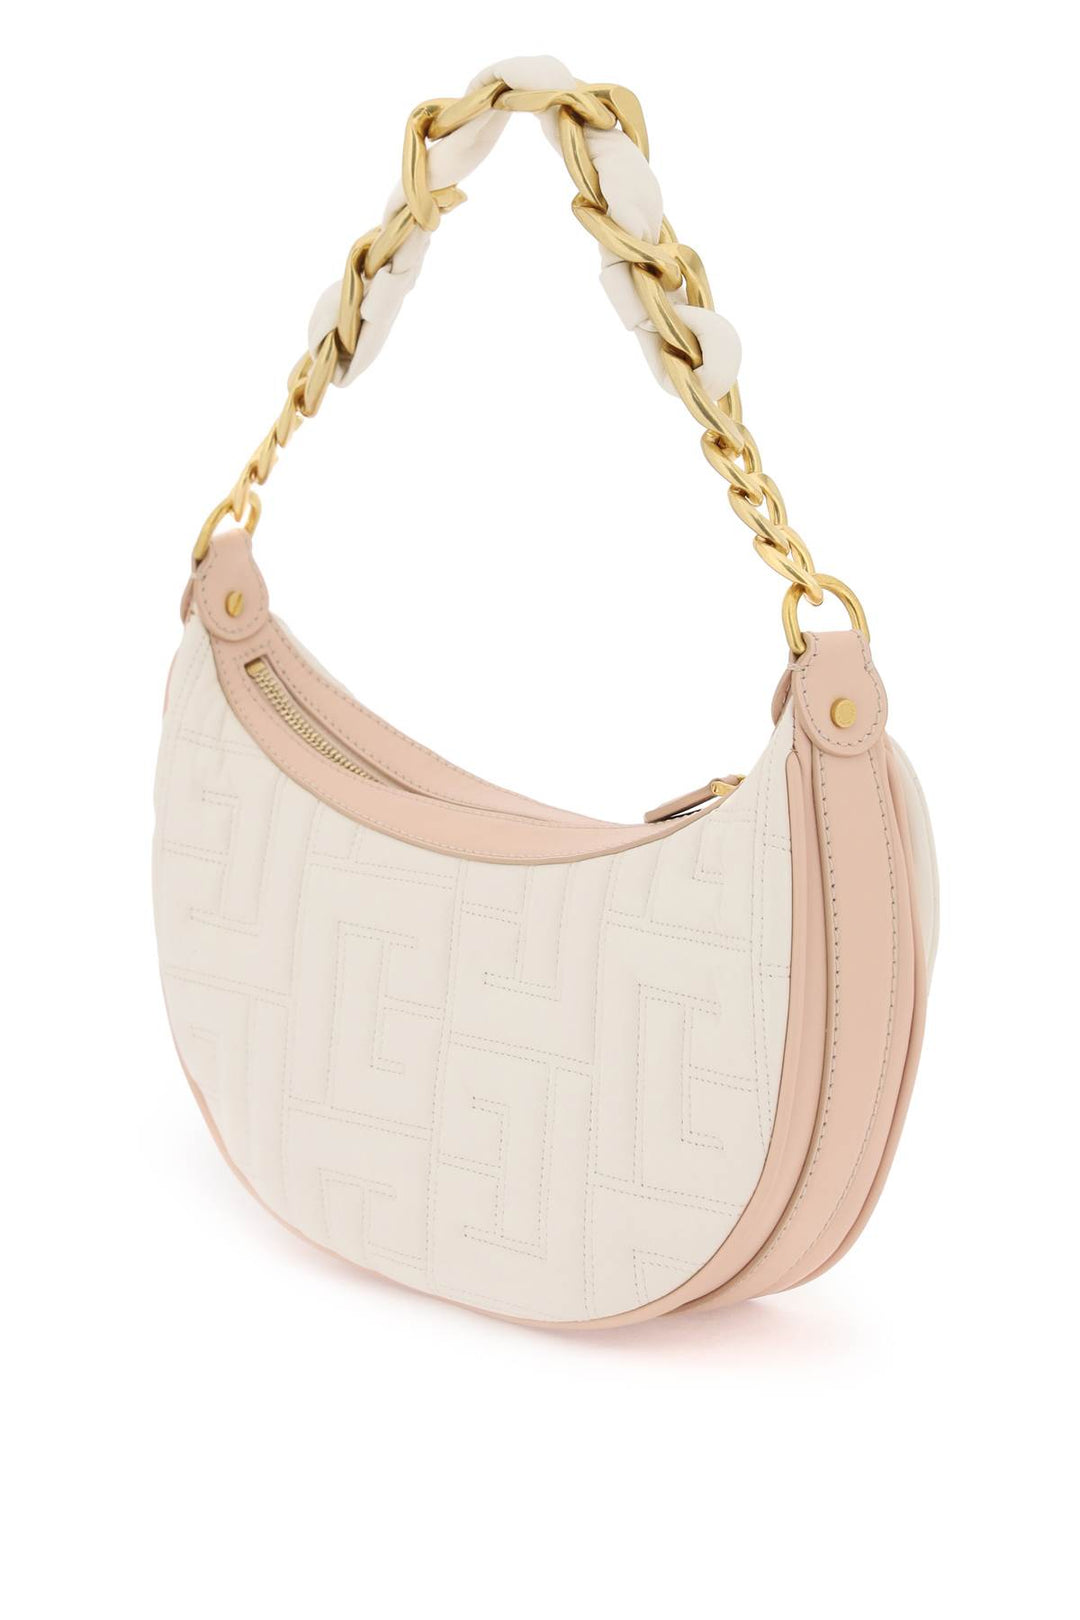 Balmain 1945 Soft Quilted Leather Hobo Bag   Bianco